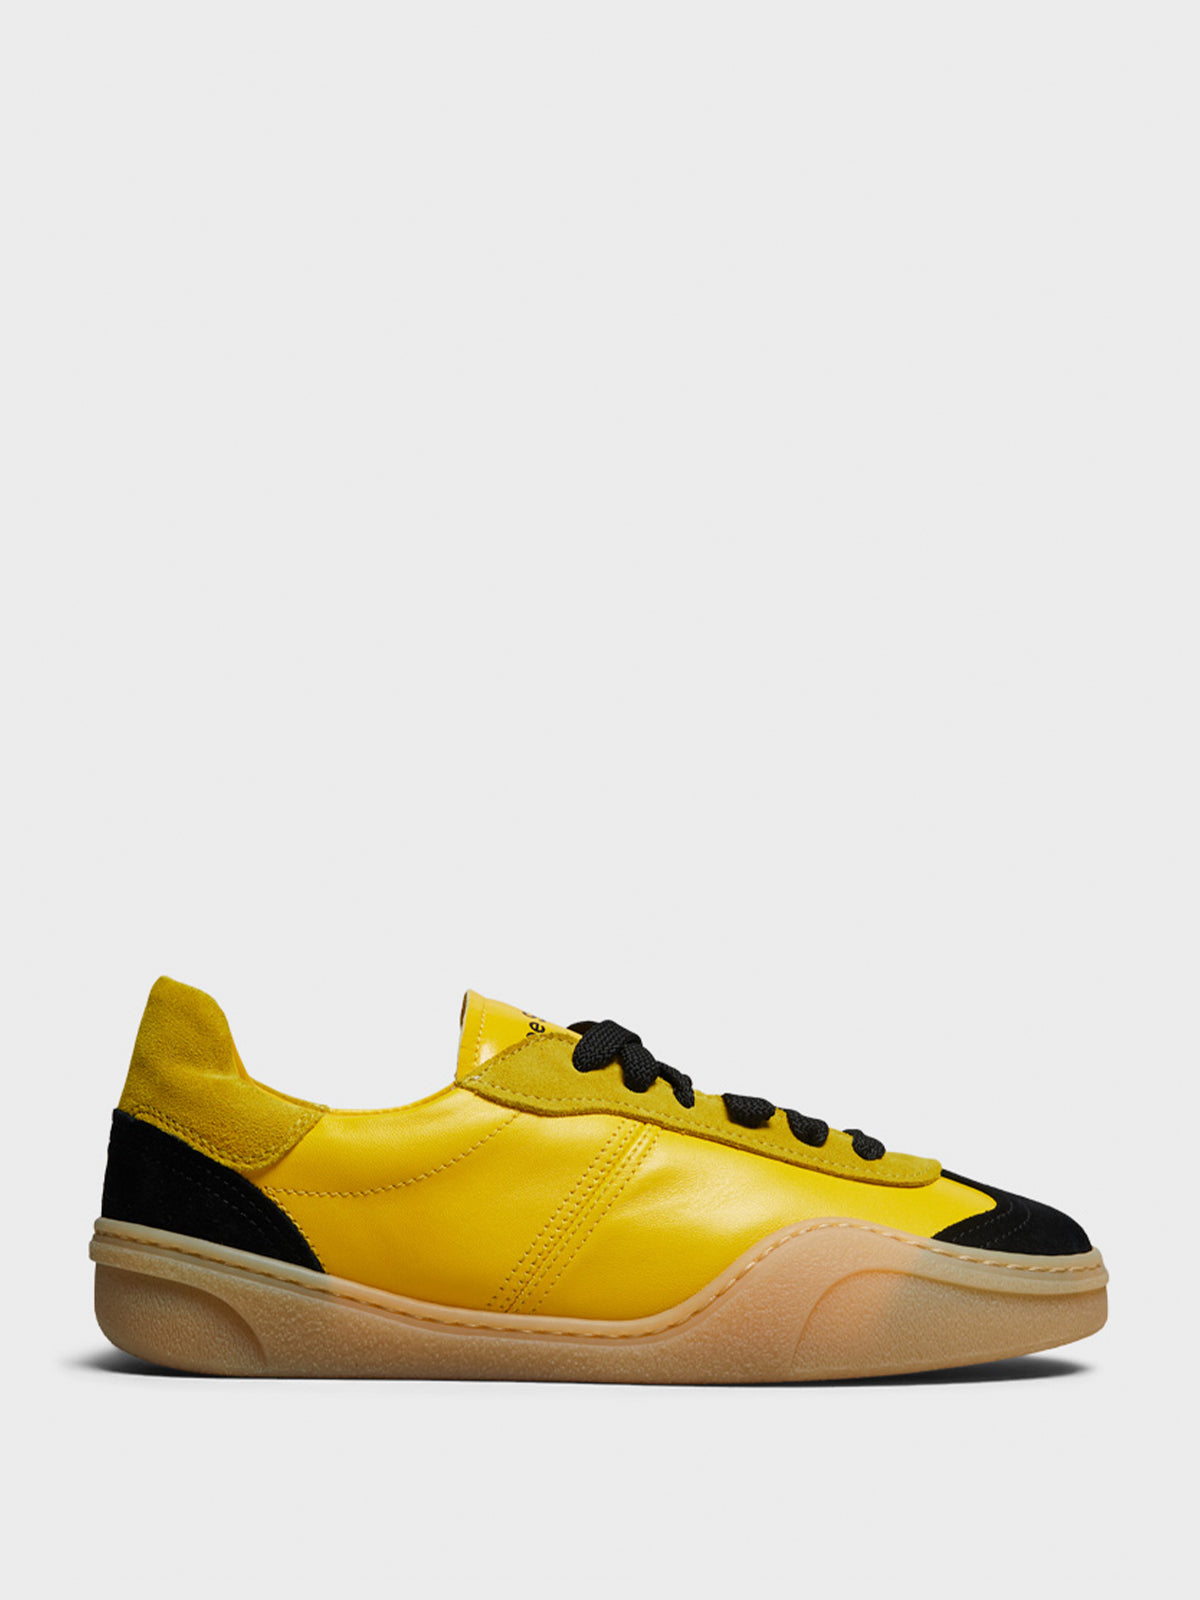 Women's Bars Sneakers in Yellow and Black